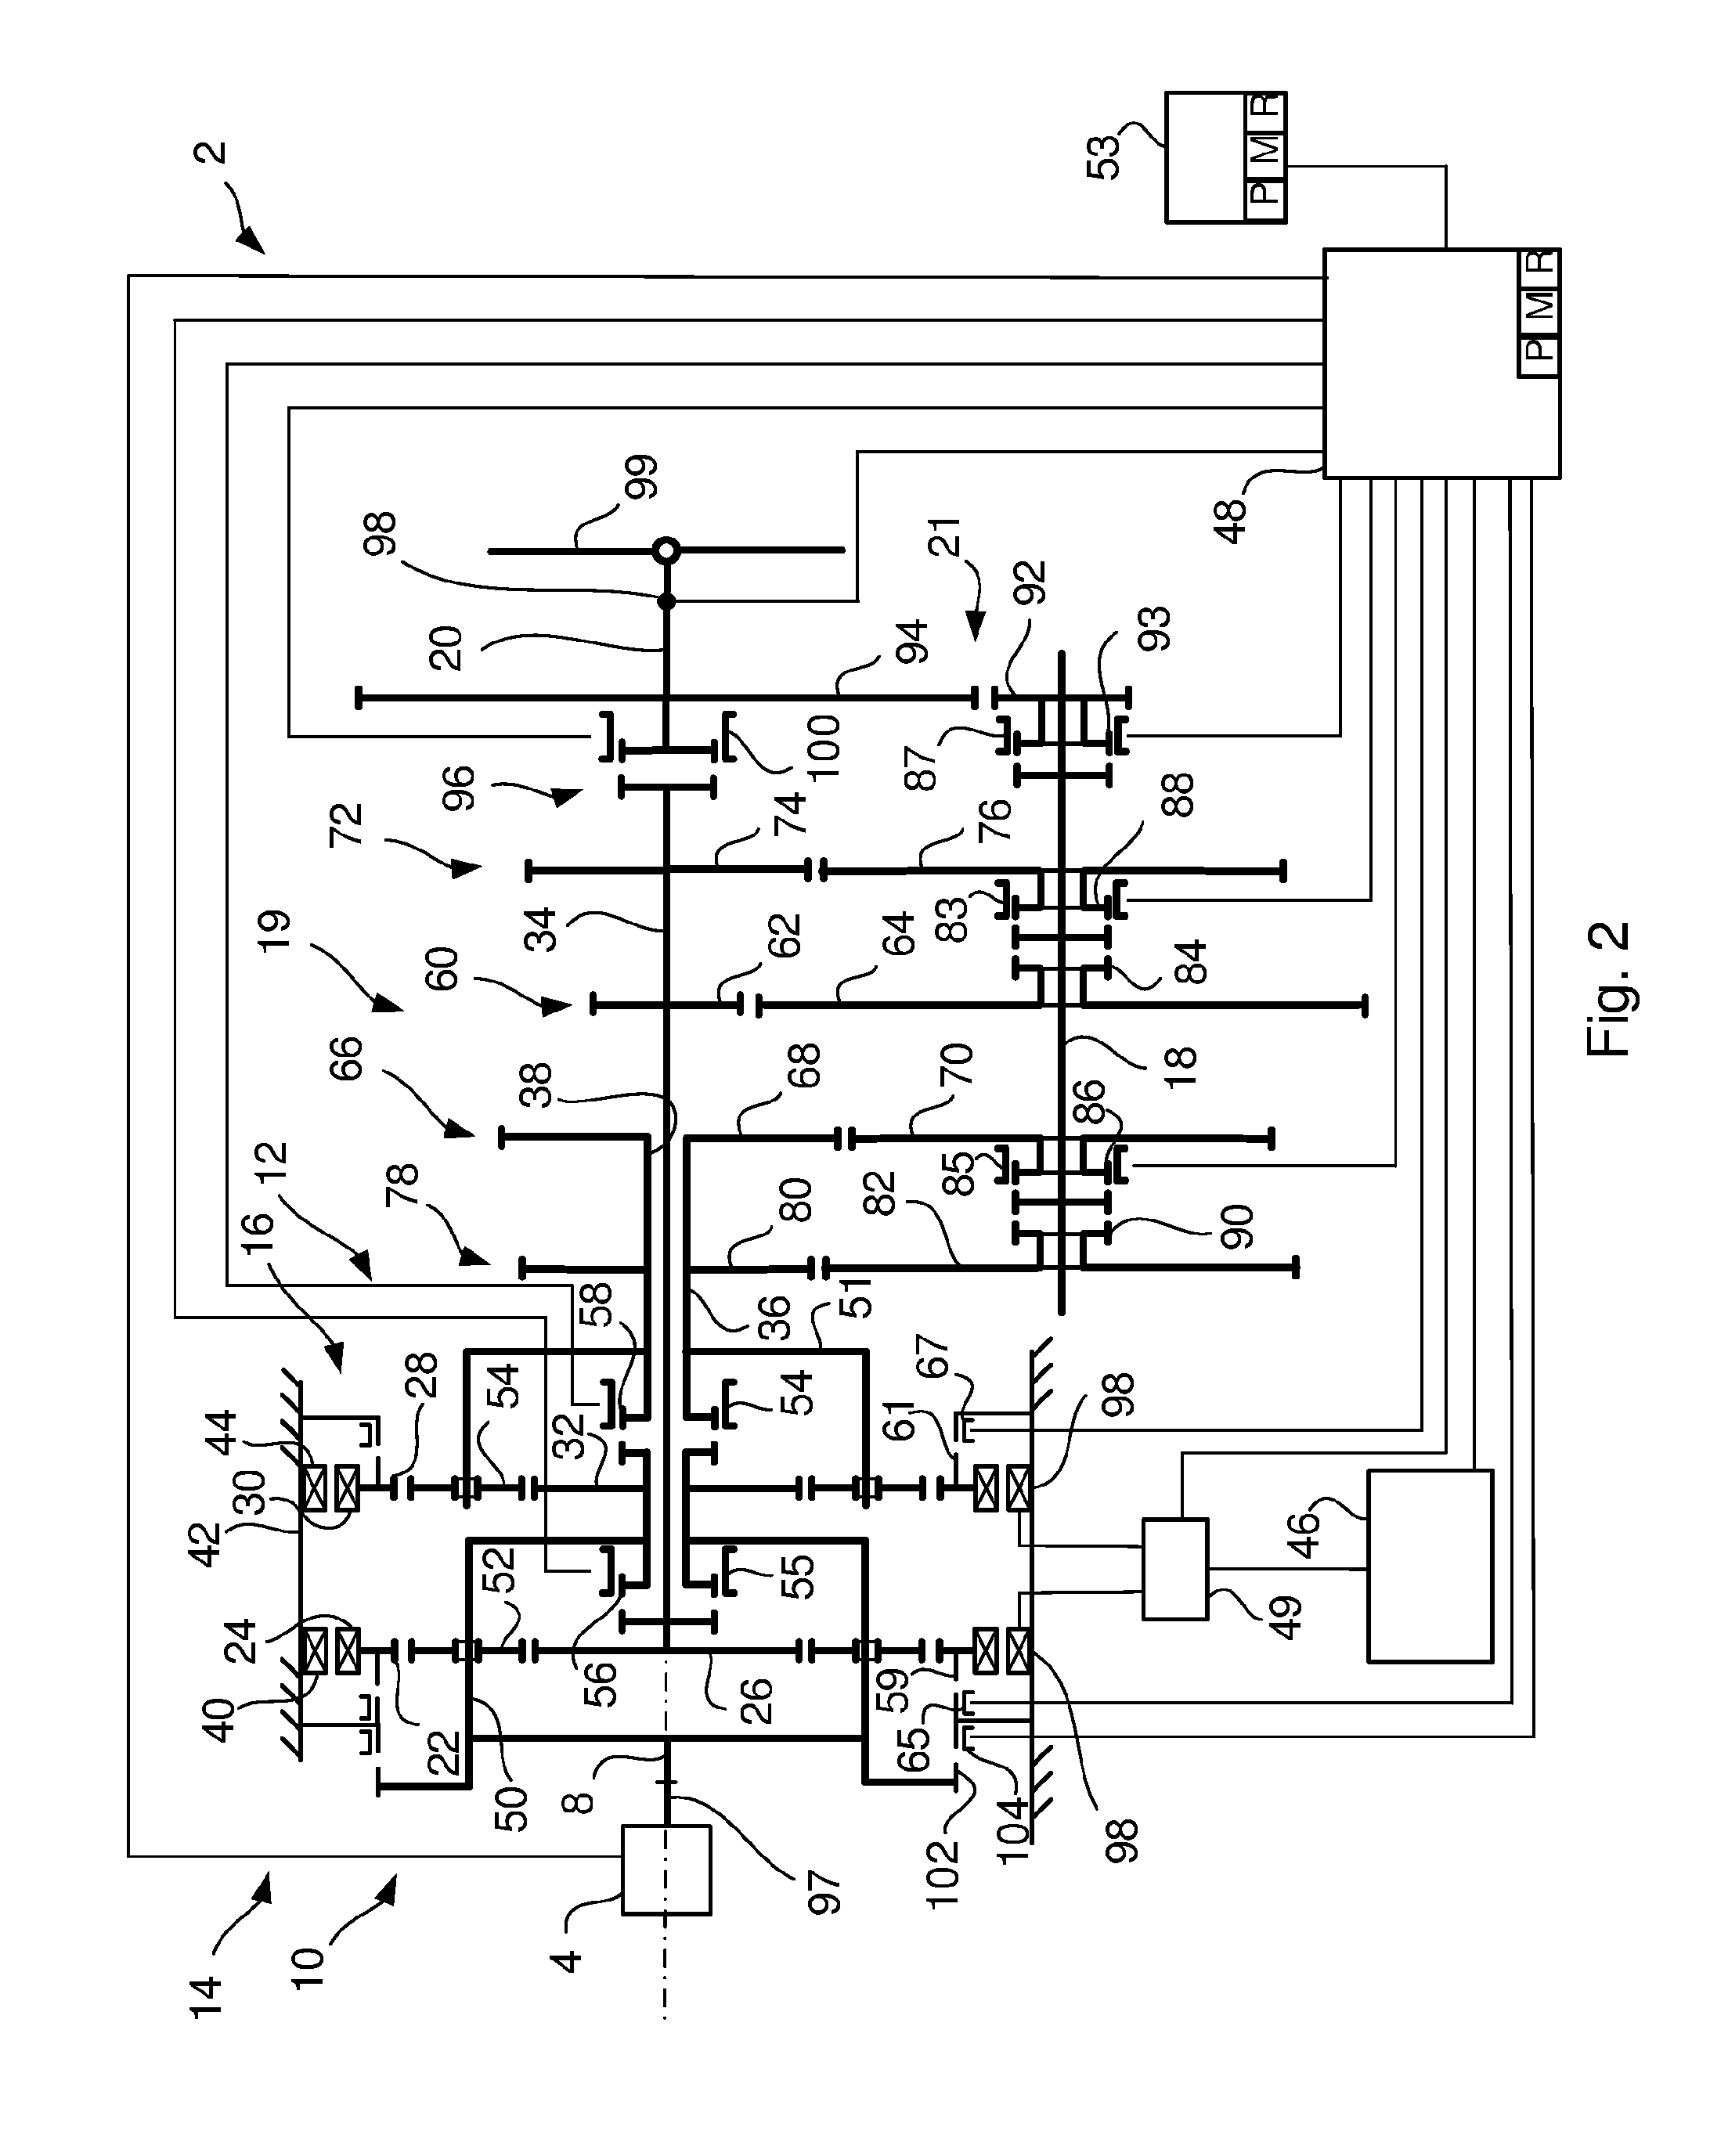 Gearbox for a hybrid powertrain and method to control the gearbox